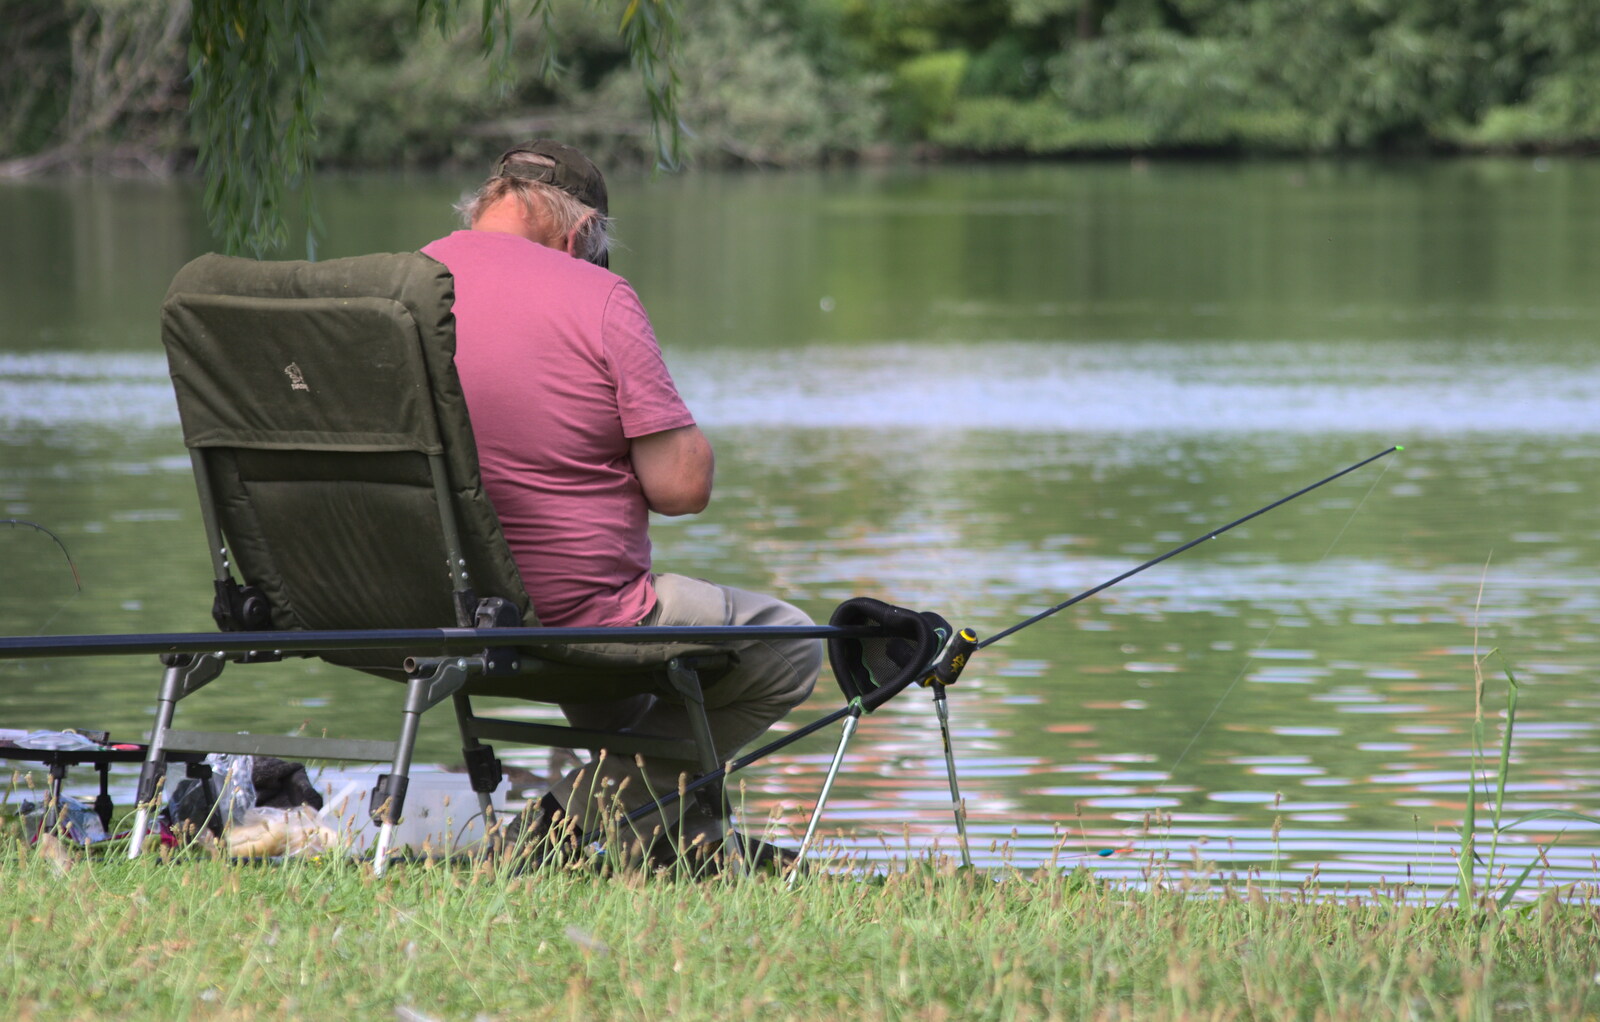 A fisherman takes a nap from Diss Fest, The Park, Diss, Norfolk - 22nd July 2018